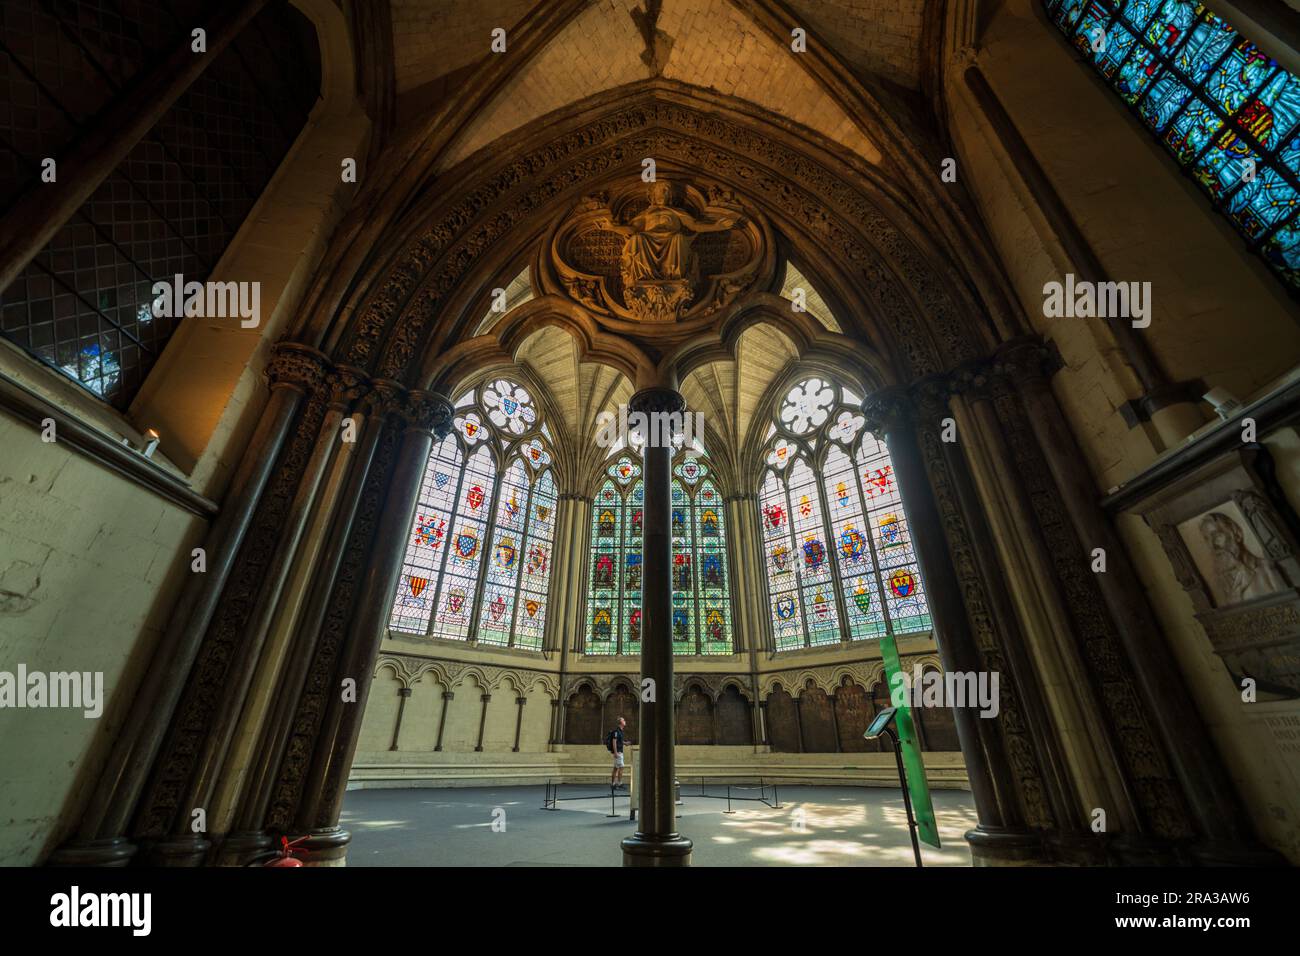 Interior of Westminster Abbey, a historic church and major attraction in London. Visit the Cloisters, Henry VII Lady Chapel and tombs of the monarchs. Stock Photo